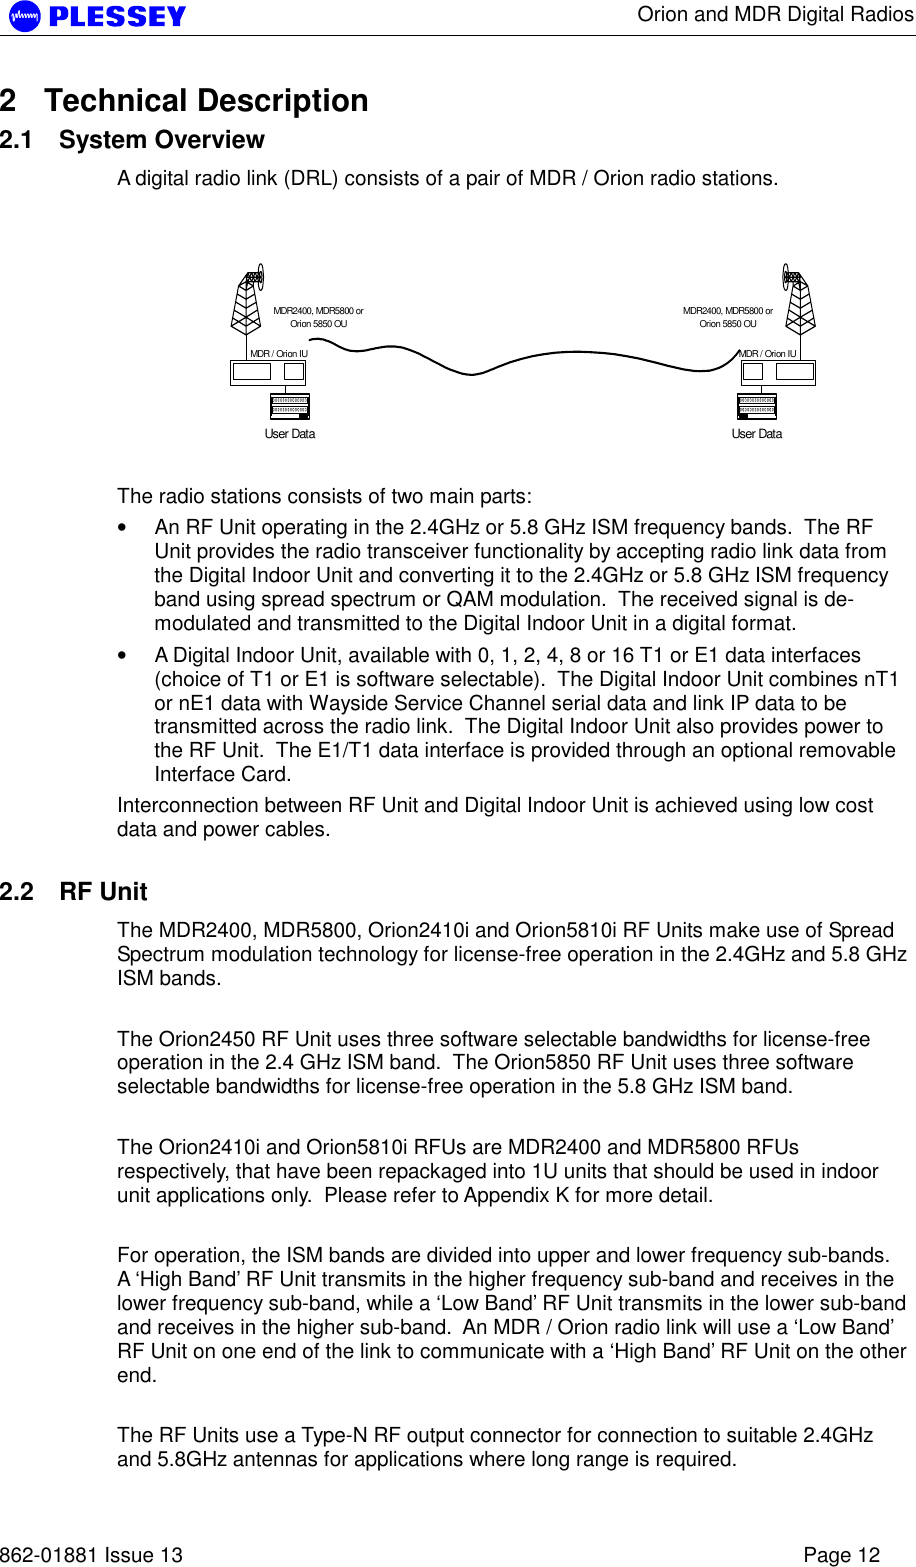      Orion and MDR Digital Radios   862-01881 Issue 13    Page 12 2 Technical Description 2.1 System Overview A digital radio link (DRL) consists of a pair of MDR / Orion radio stations.    The radio stations consists of two main parts: • An RF Unit operating in the 2.4GHz or 5.8 GHz ISM frequency bands.  The RF Unit provides the radio transceiver functionality by accepting radio link data from the Digital Indoor Unit and converting it to the 2.4GHz or 5.8 GHz ISM frequency band using spread spectrum or QAM modulation.  The received signal is de-modulated and transmitted to the Digital Indoor Unit in a digital format. • A Digital Indoor Unit, available with 0, 1, 2, 4, 8 or 16 T1 or E1 data interfaces (choice of T1 or E1 is software selectable).  The Digital Indoor Unit combines nT1 or nE1 data with Wayside Service Channel serial data and link IP data to be transmitted across the radio link.  The Digital Indoor Unit also provides power to the RF Unit.  The E1/T1 data interface is provided through an optional removable Interface Card. Interconnection between RF Unit and Digital Indoor Unit is achieved using low cost data and power cables.  2.2 RF Unit The MDR2400, MDR5800, Orion2410i and Orion5810i RF Units make use of Spread Spectrum modulation technology for license-free operation in the 2.4GHz and 5.8 GHz ISM bands.    The Orion2450 RF Unit uses three software selectable bandwidths for license-free operation in the 2.4 GHz ISM band.  The Orion5850 RF Unit uses three software selectable bandwidths for license-free operation in the 5.8 GHz ISM band.  The Orion2410i and Orion5810i RFUs are MDR2400 and MDR5800 RFUs respectively, that have been repackaged into 1U units that should be used in indoor unit applications only.  Please refer to Appendix K for more detail.  For operation, the ISM bands are divided into upper and lower frequency sub-bands.  A ‘High Band’ RF Unit transmits in the higher frequency sub-band and receives in the lower frequency sub-band, while a ‘Low Band’ RF Unit transmits in the lower sub-band and receives in the higher sub-band.  An MDR / Orion radio link will use a ‘Low Band’ RF Unit on one end of the link to communicate with a ‘High Band’ RF Unit on the other end.  The RF Units use a Type-N RF output connector for connection to suitable 2.4GHz and 5.8GHz antennas for applications where long range is required. User DataMDR2400, MDR5800 orOrion 5850 OUMDR / Orion IUUser DataMDR2400, MDR5800 orOrion 5850 OUMDR / Orion IU